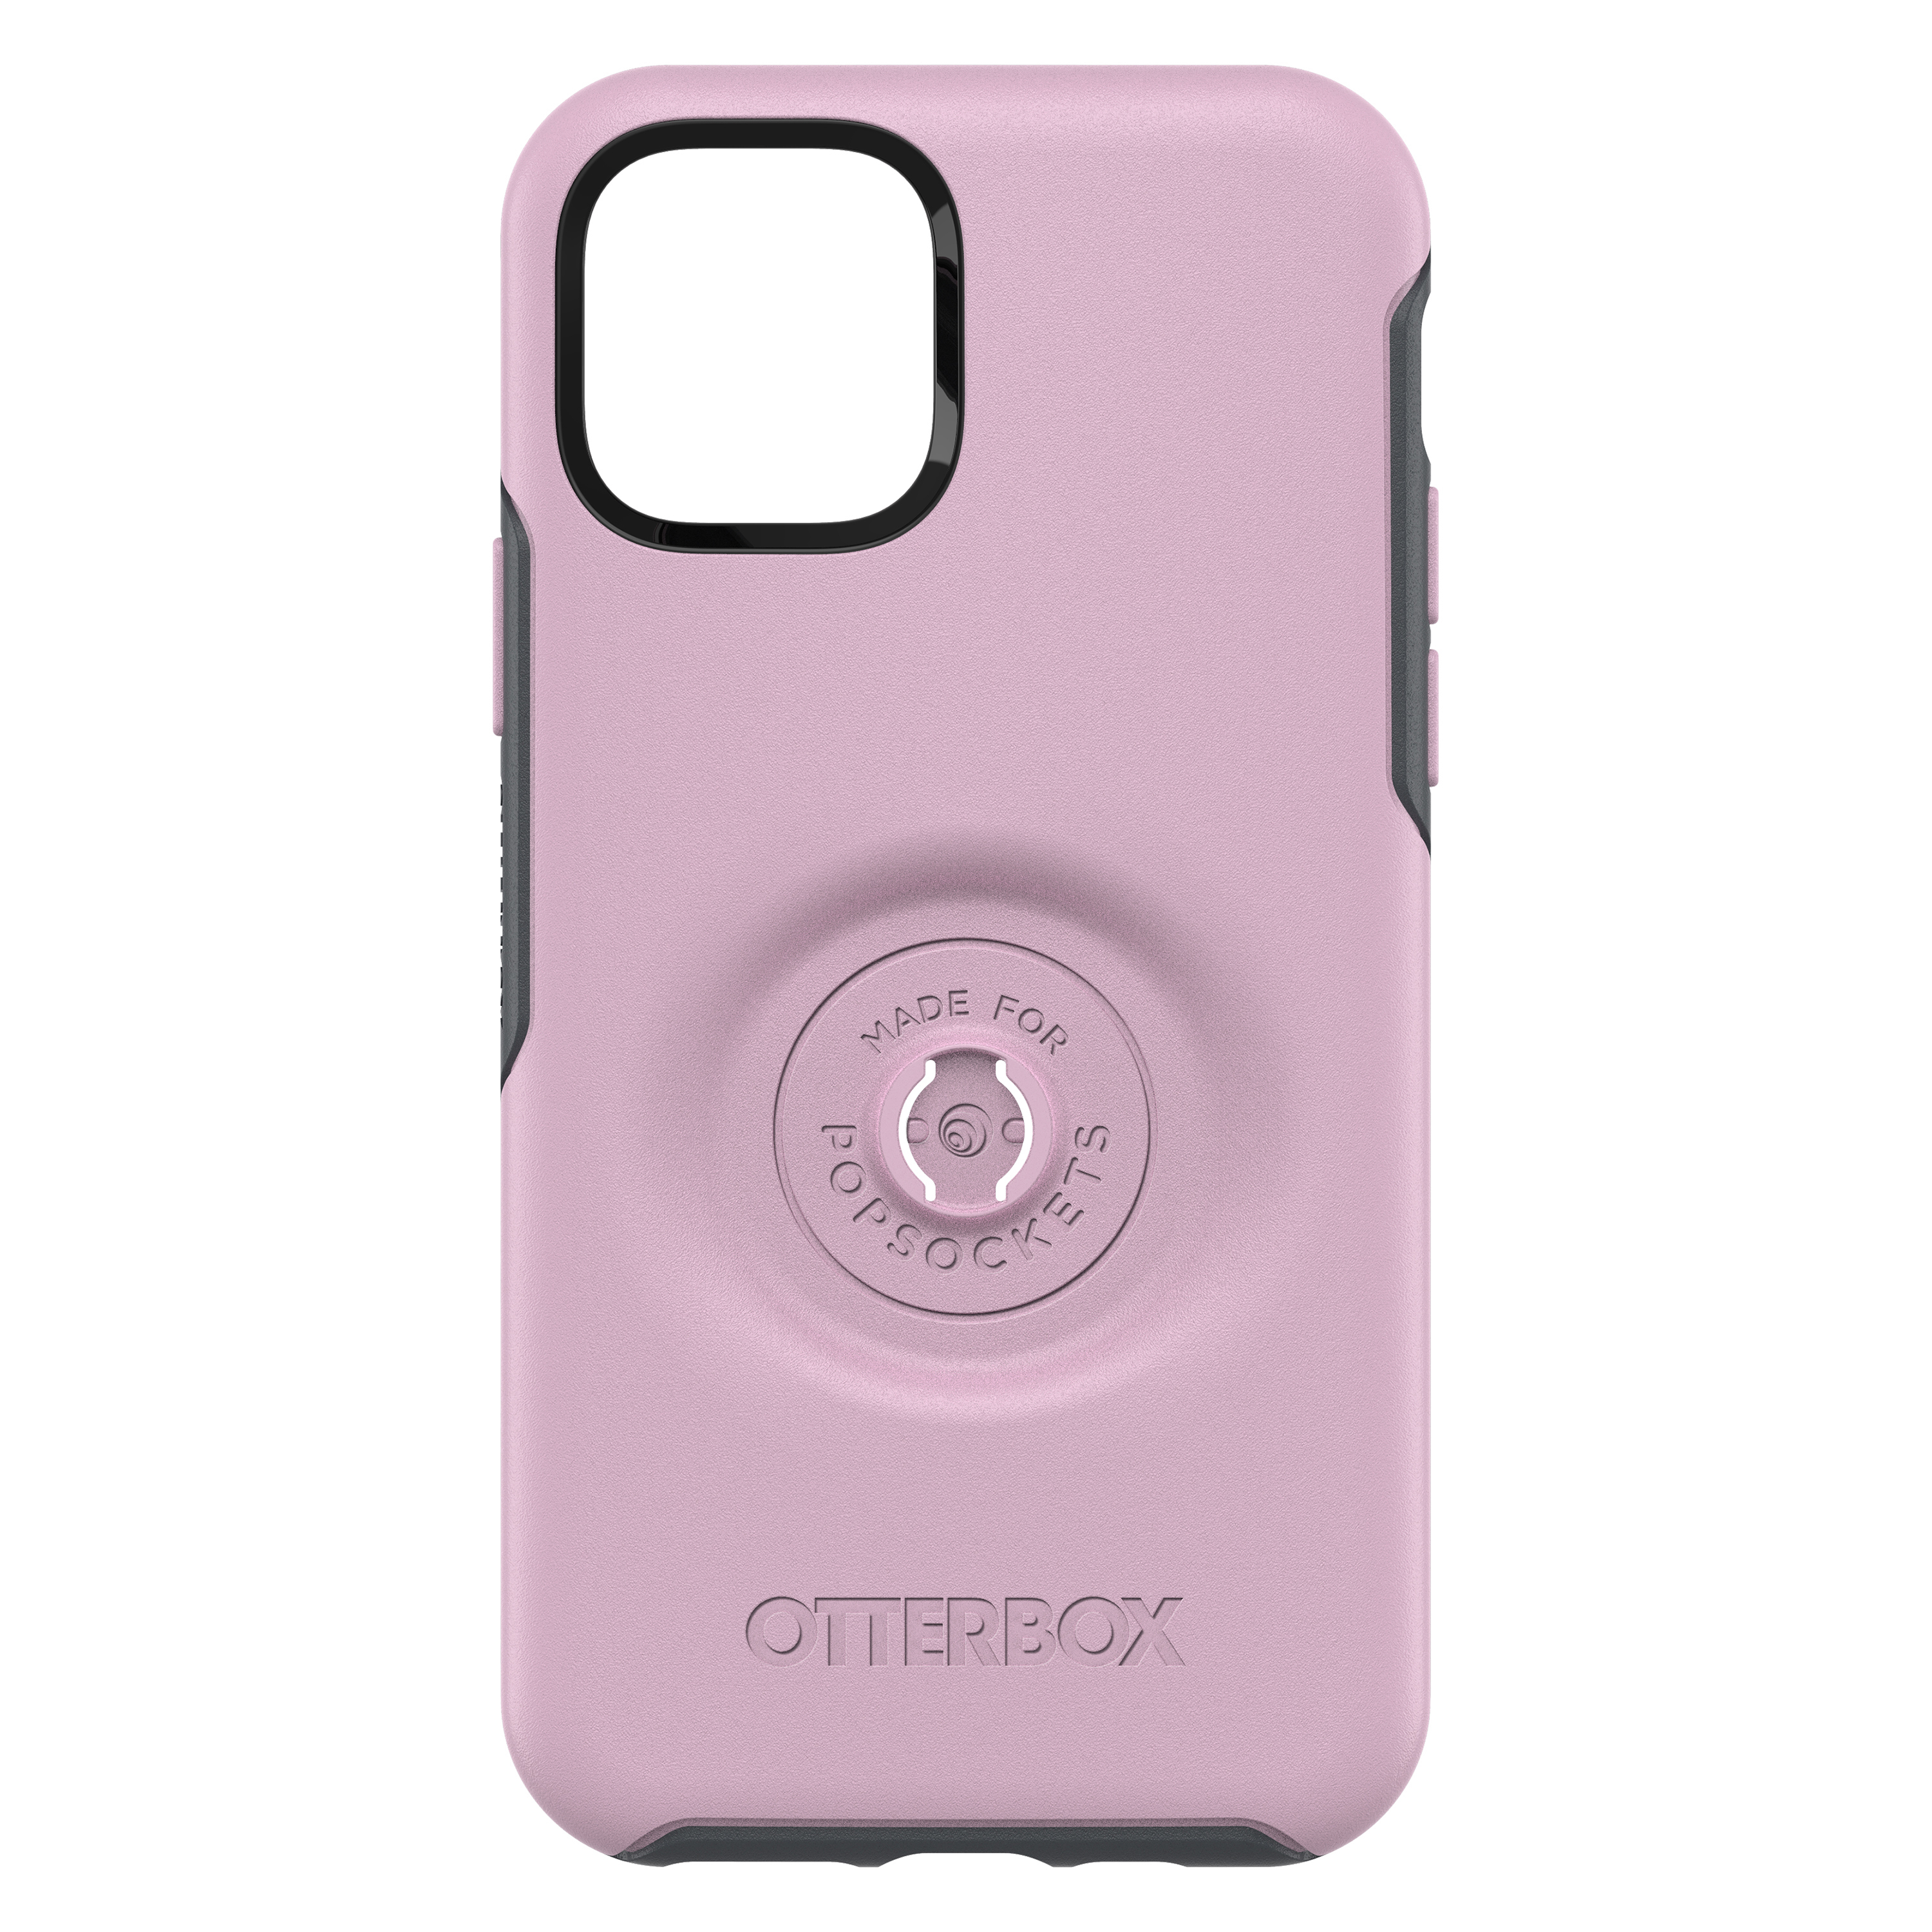 11 iPhone Apple, Backcover, Symmetry, Rosa OTTERBOX Pro,